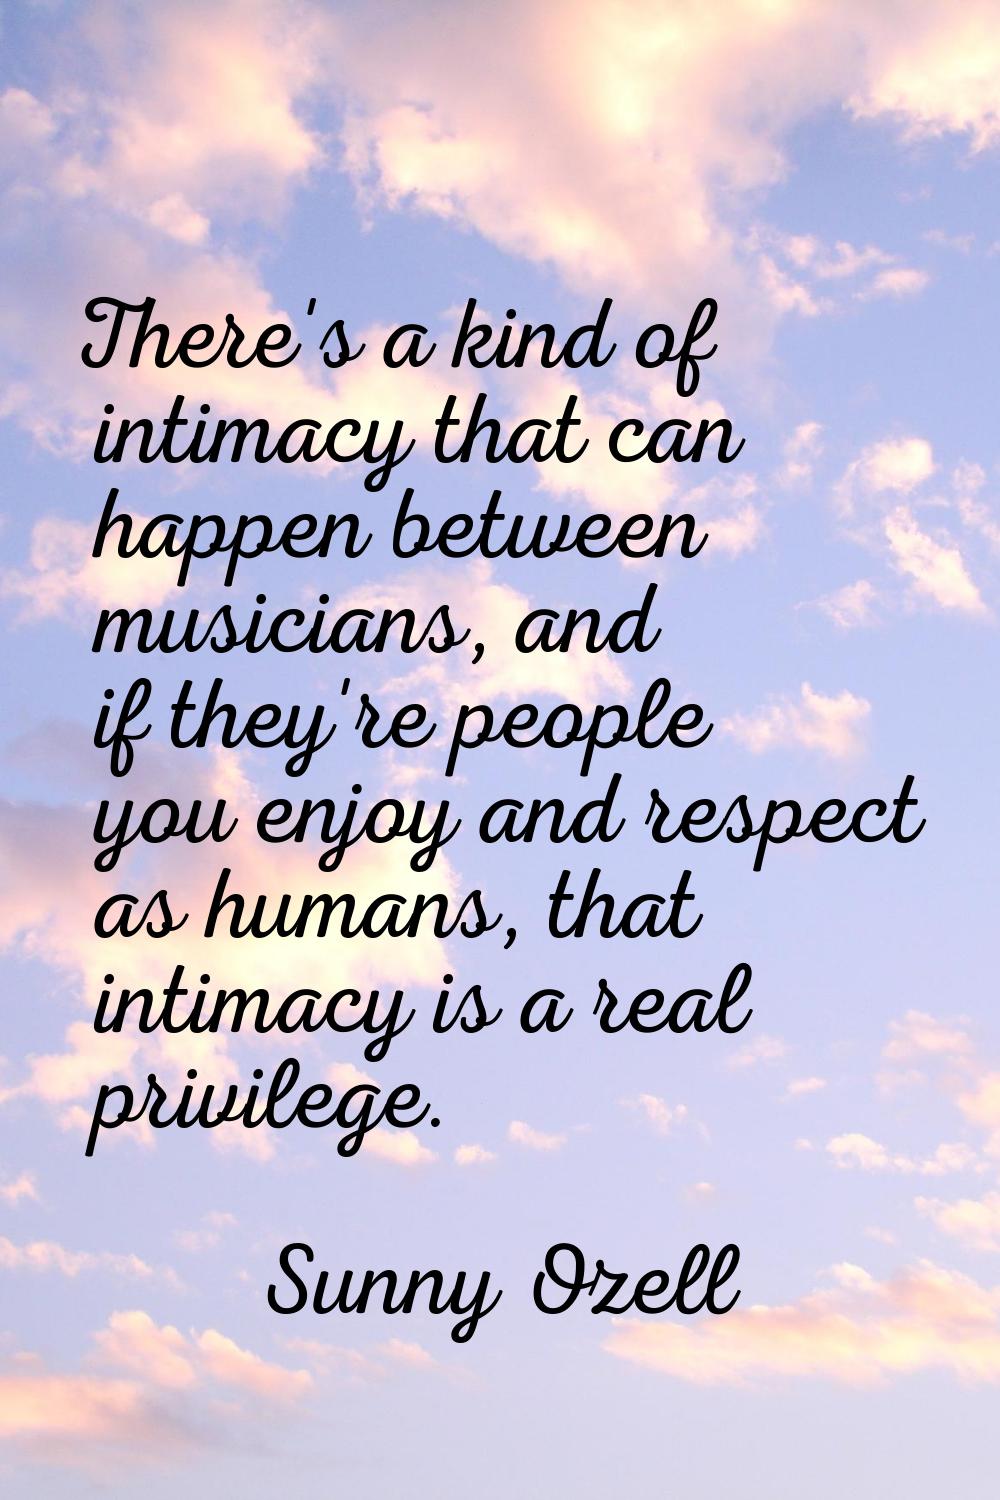 There's a kind of intimacy that can happen between musicians, and if they're people you enjoy and r